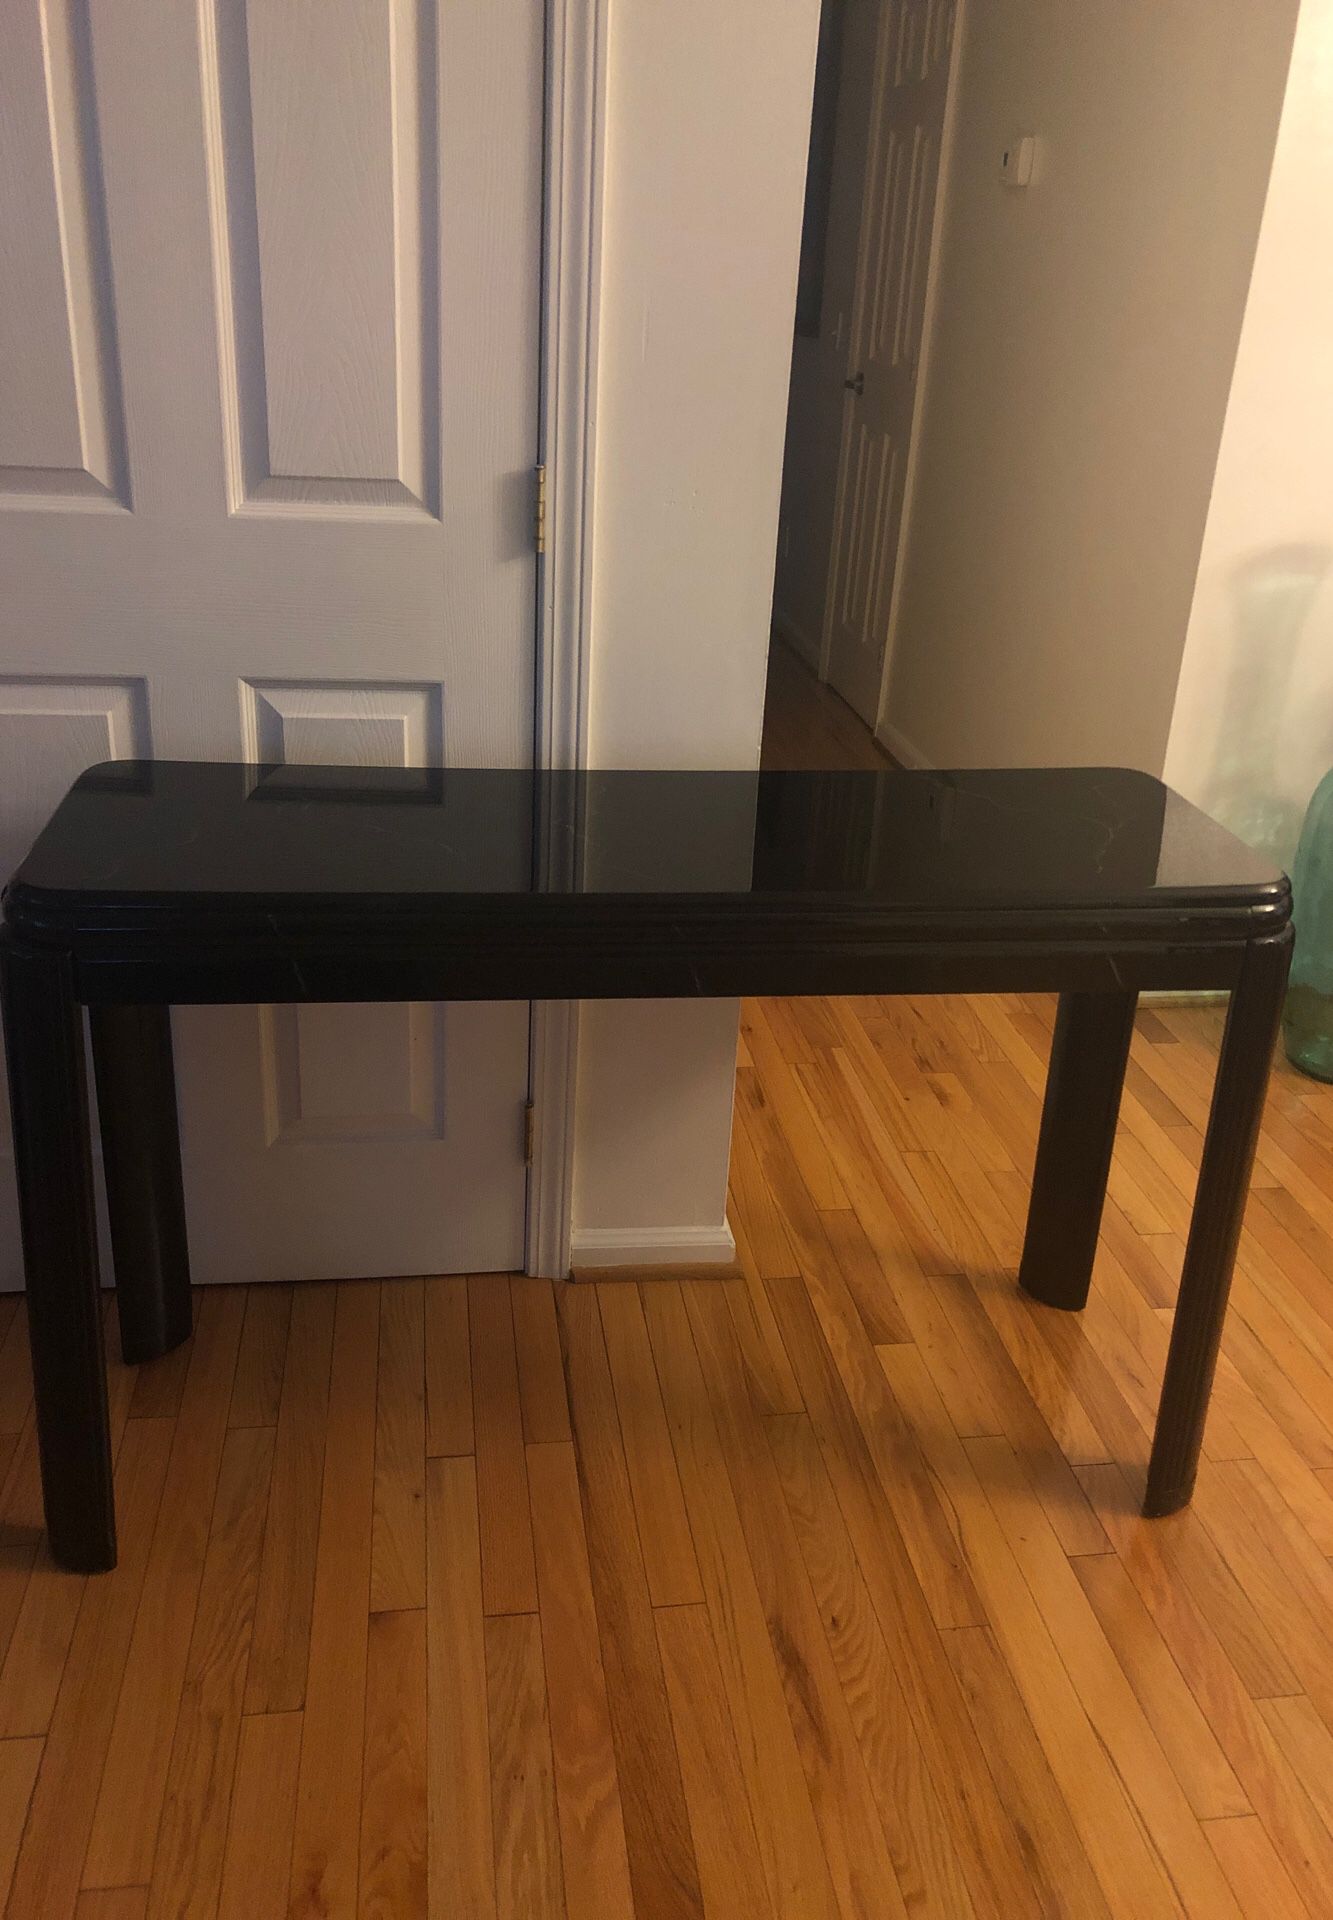 Console table . Good condition